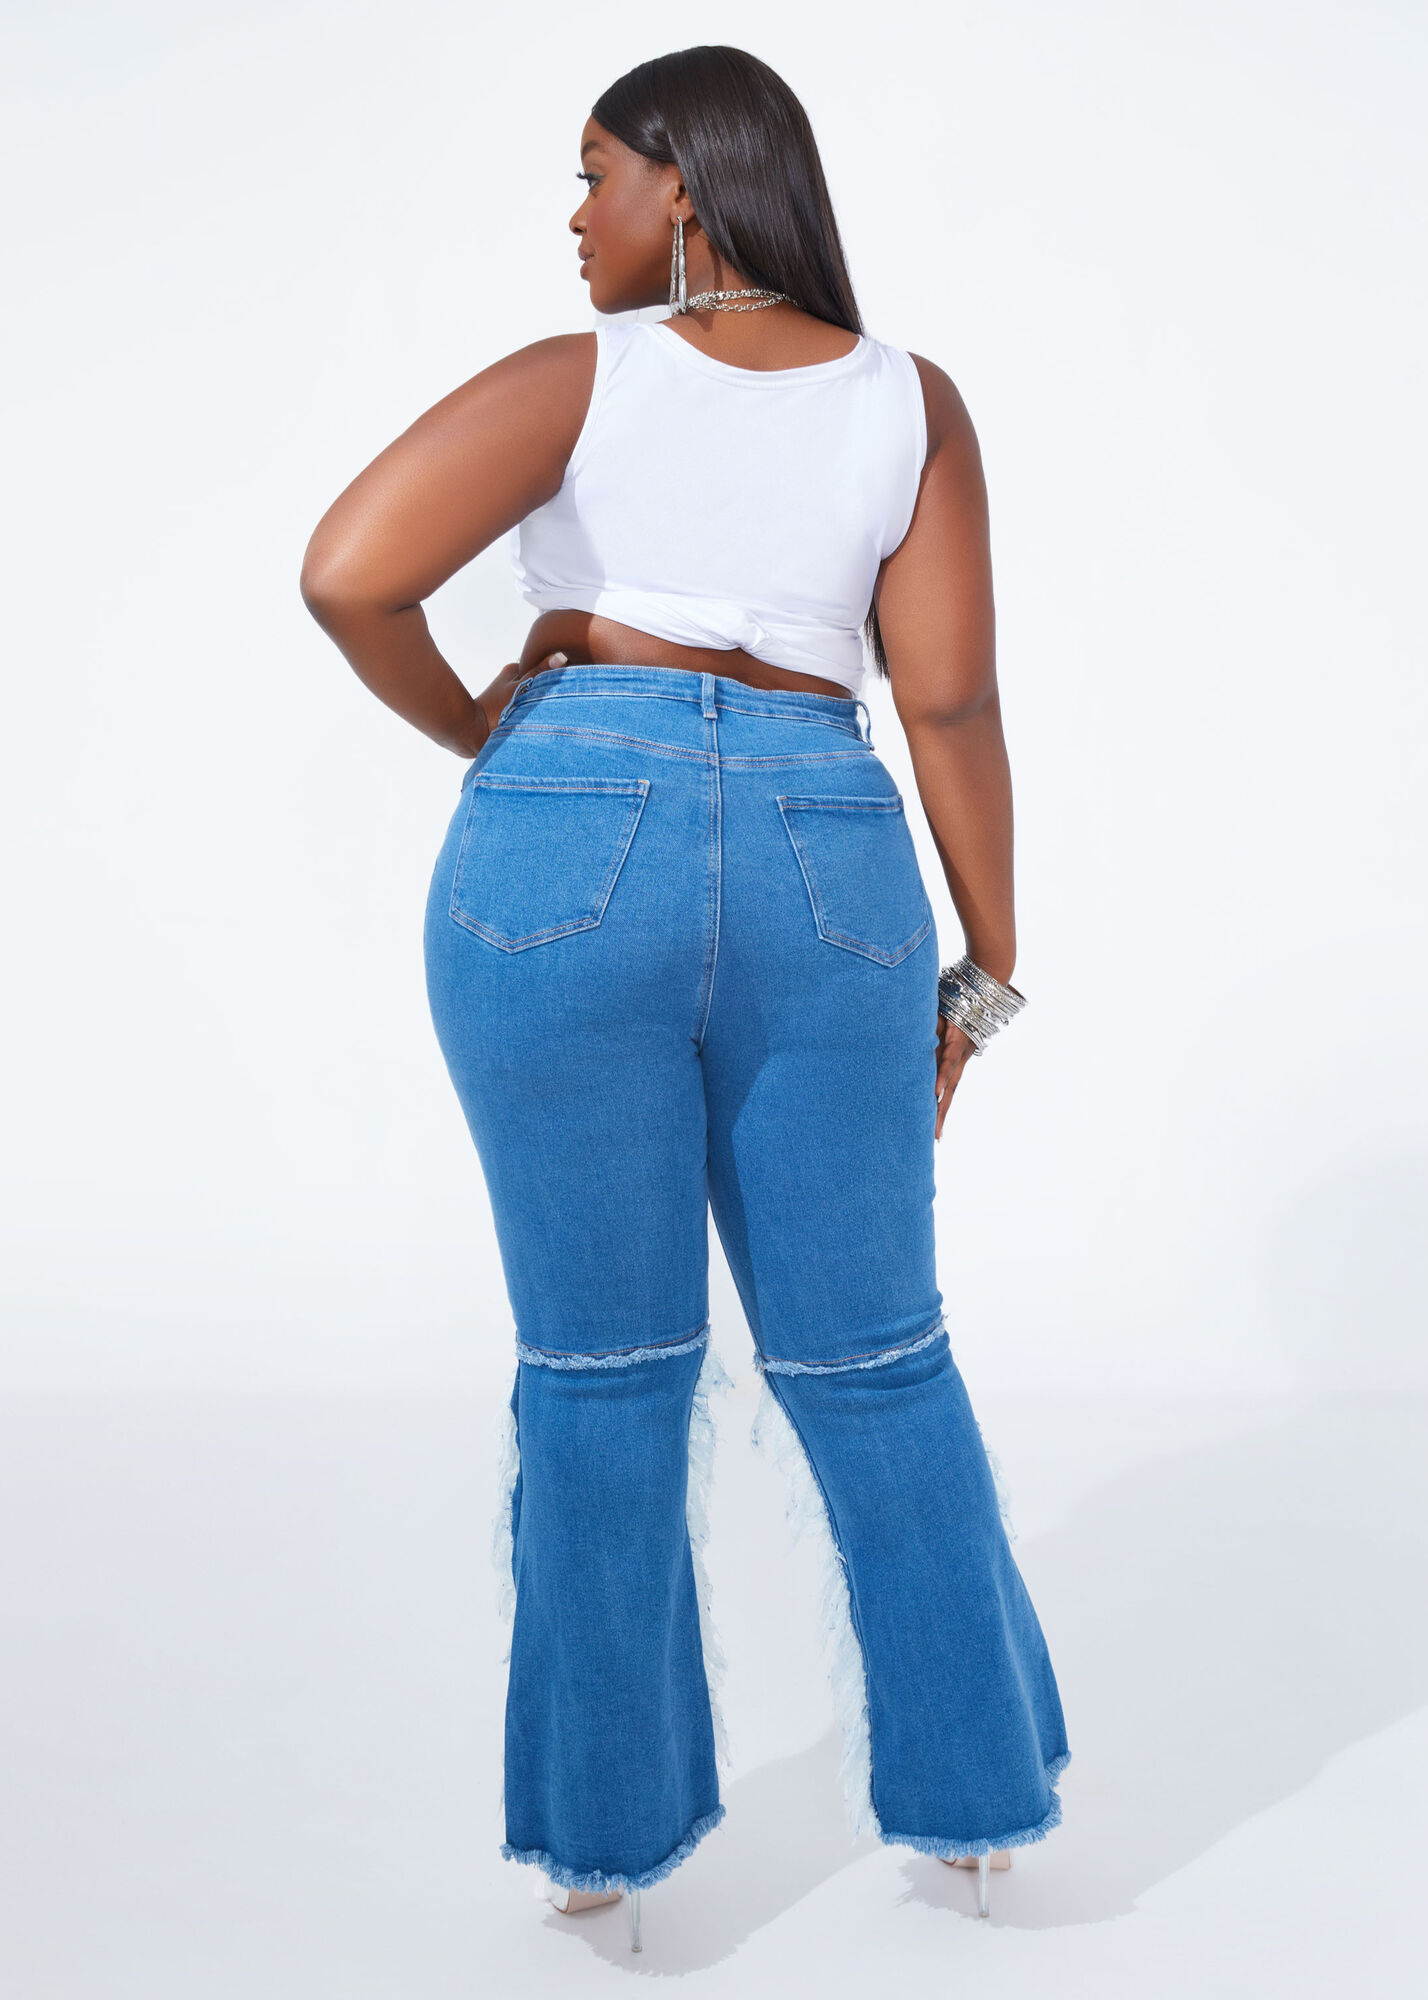 Plus Size Flared Jeans High Waist Stretchy Denim Distressed Flare Jean